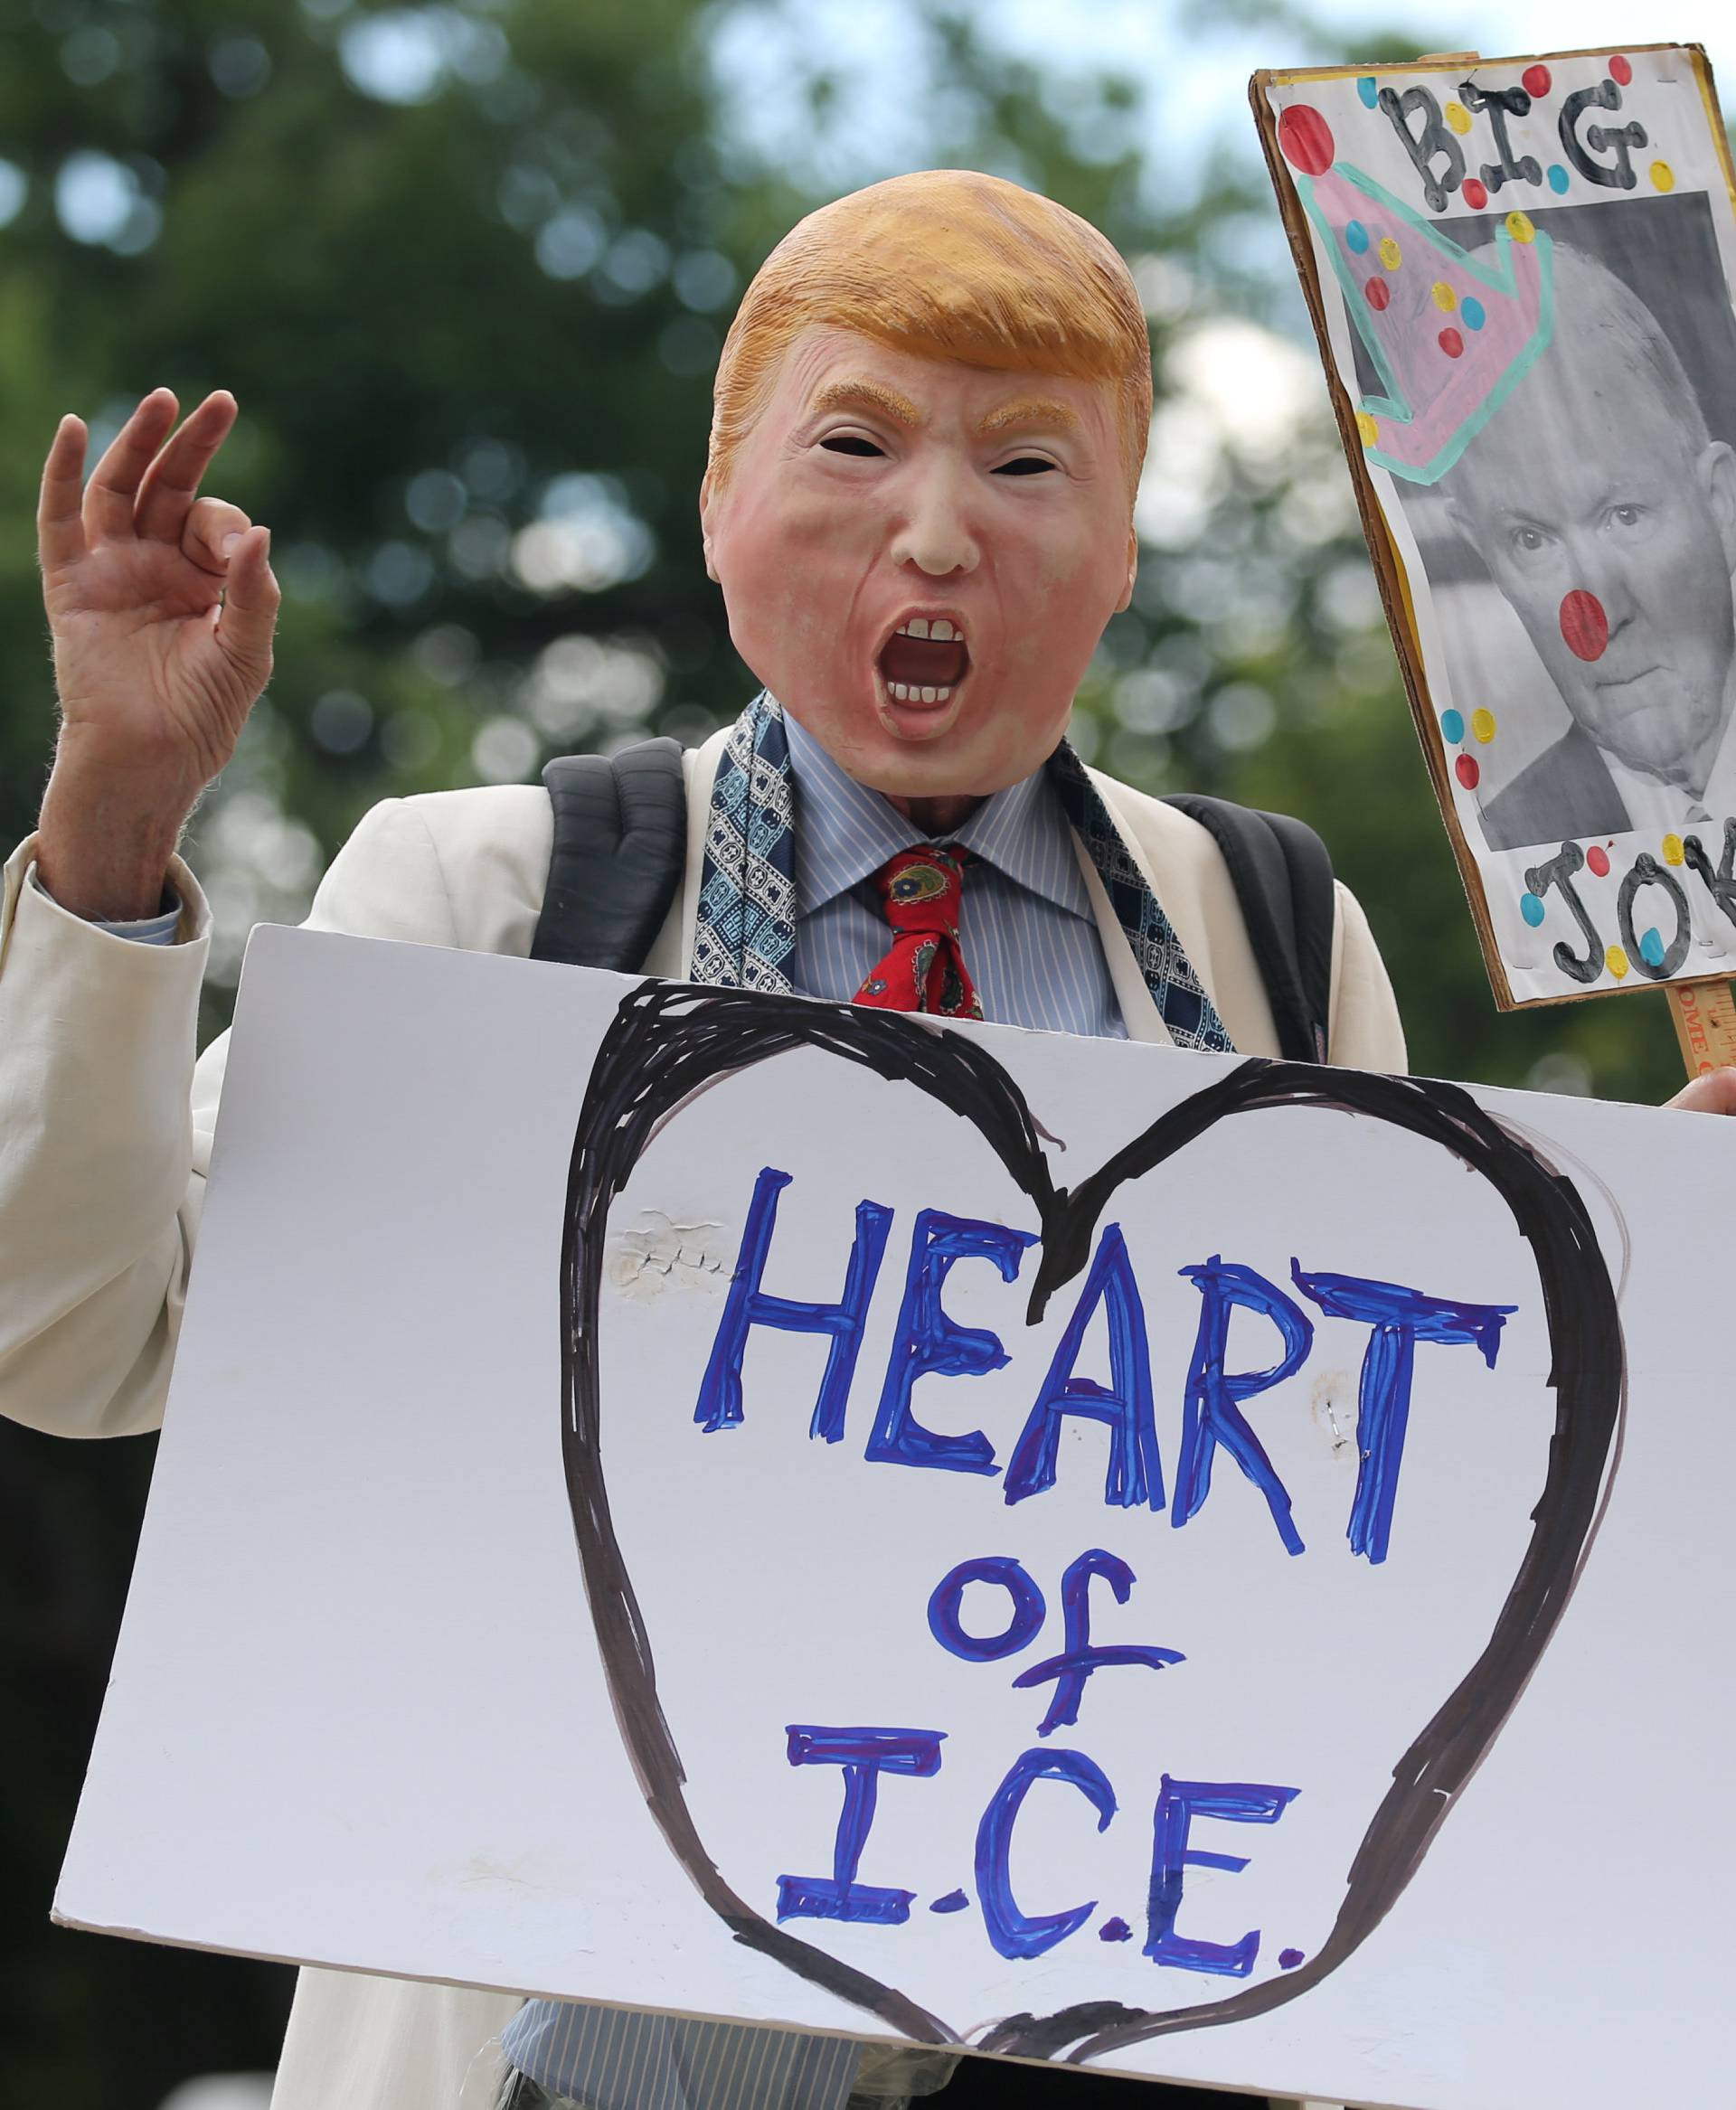 Immigration activists rally in Washington